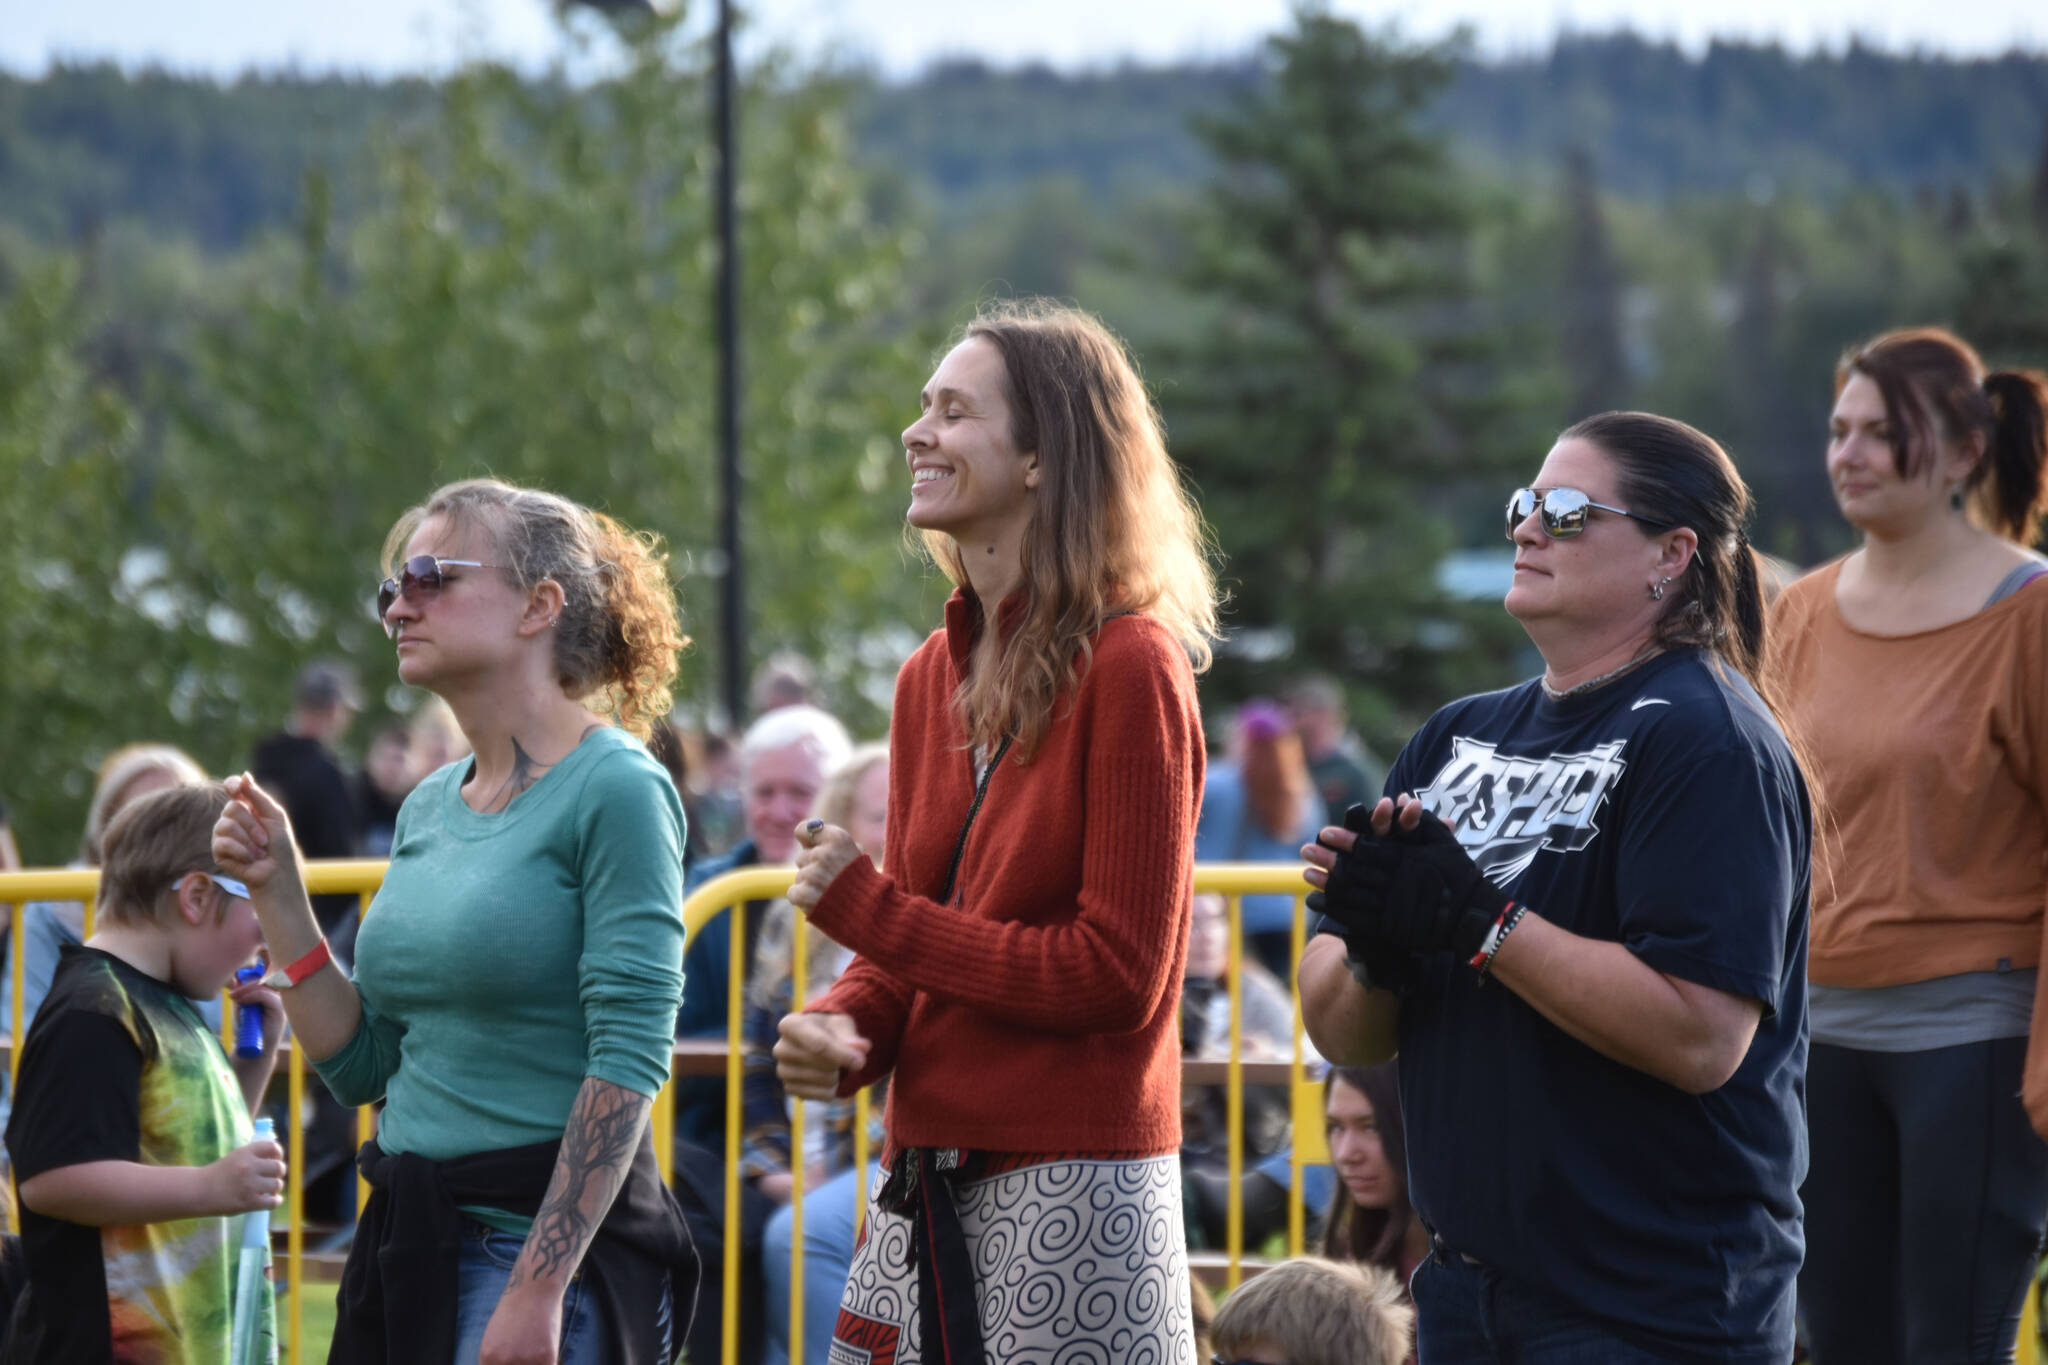 Amy Jackman (center) and others dance to music performed by Kuf Knotz and Christine Elise on Aug. 24, 2022, in Soldotna, Alaska. (Jake Dye/Peninsula Clarion)